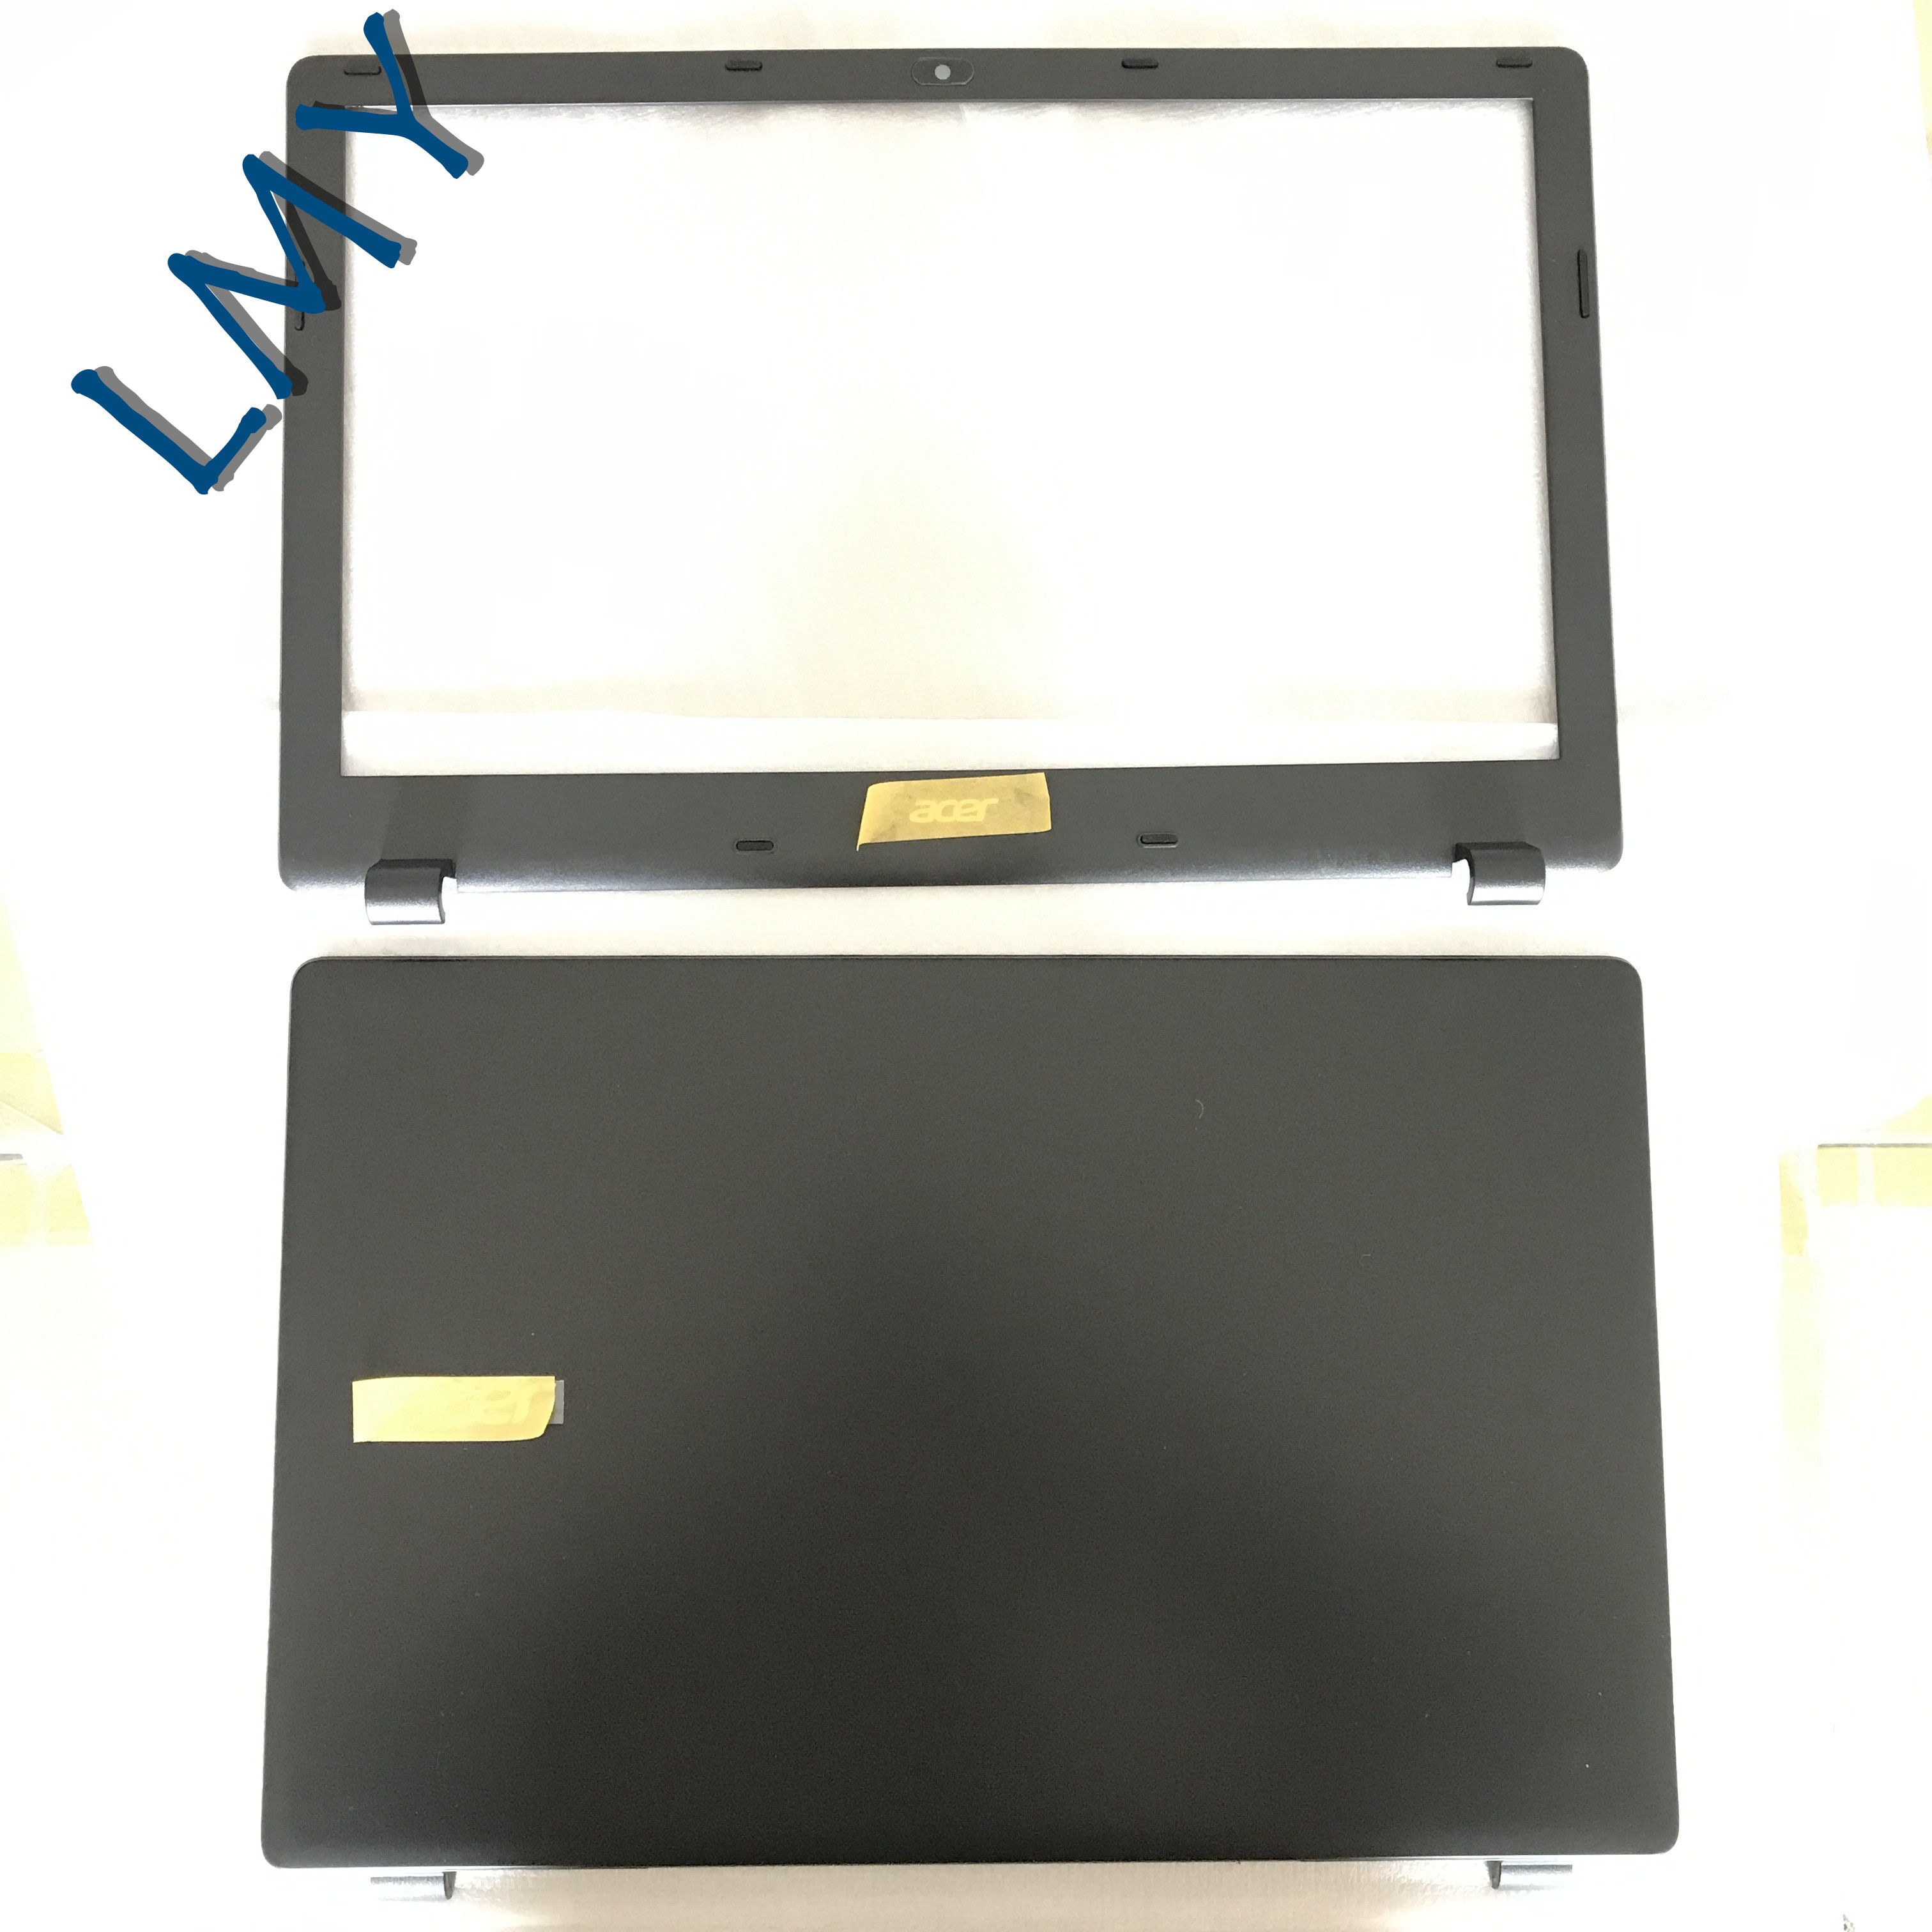 Voor ACER Aspire E5-572G E5-571 E5-551 E5-521 E5-511 E5-511G E5-551G E5-571G E5-531 LCD Back Cover of Front Bezel